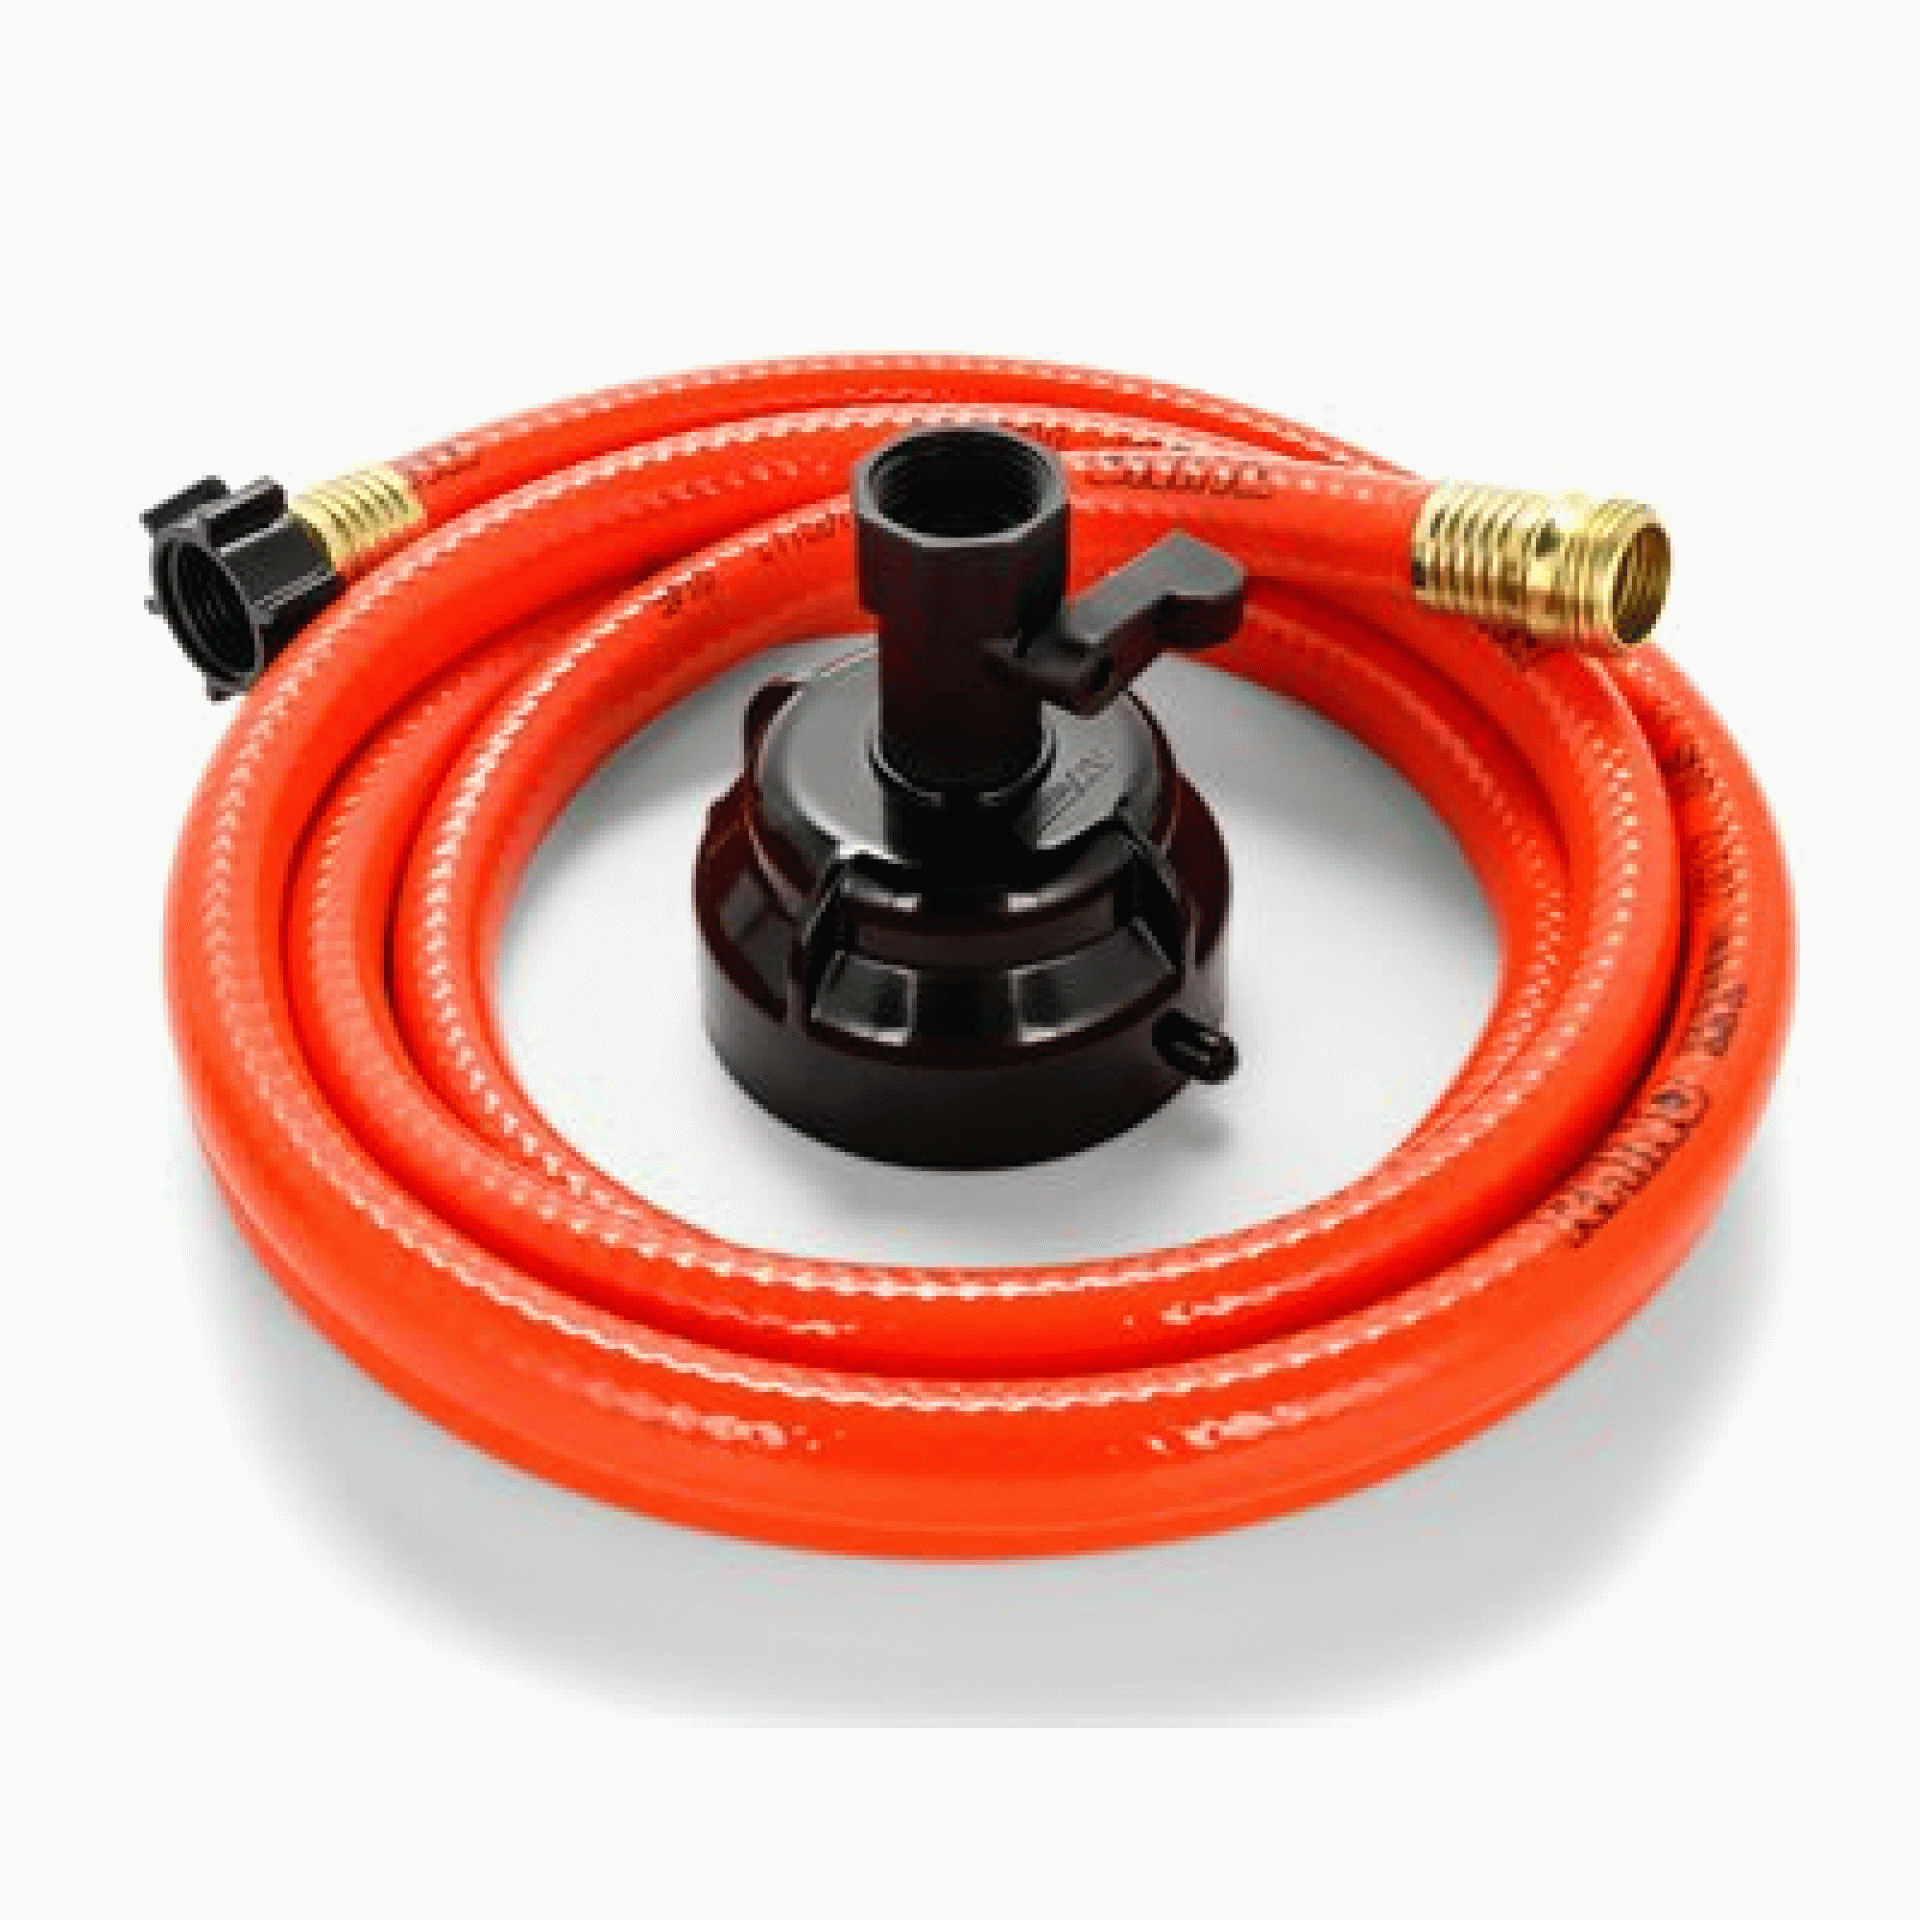 CAMCO MFG INC | 22999 | RhinoFLEX 10' Clean Out Hose System 5/8" with Rinse Cap